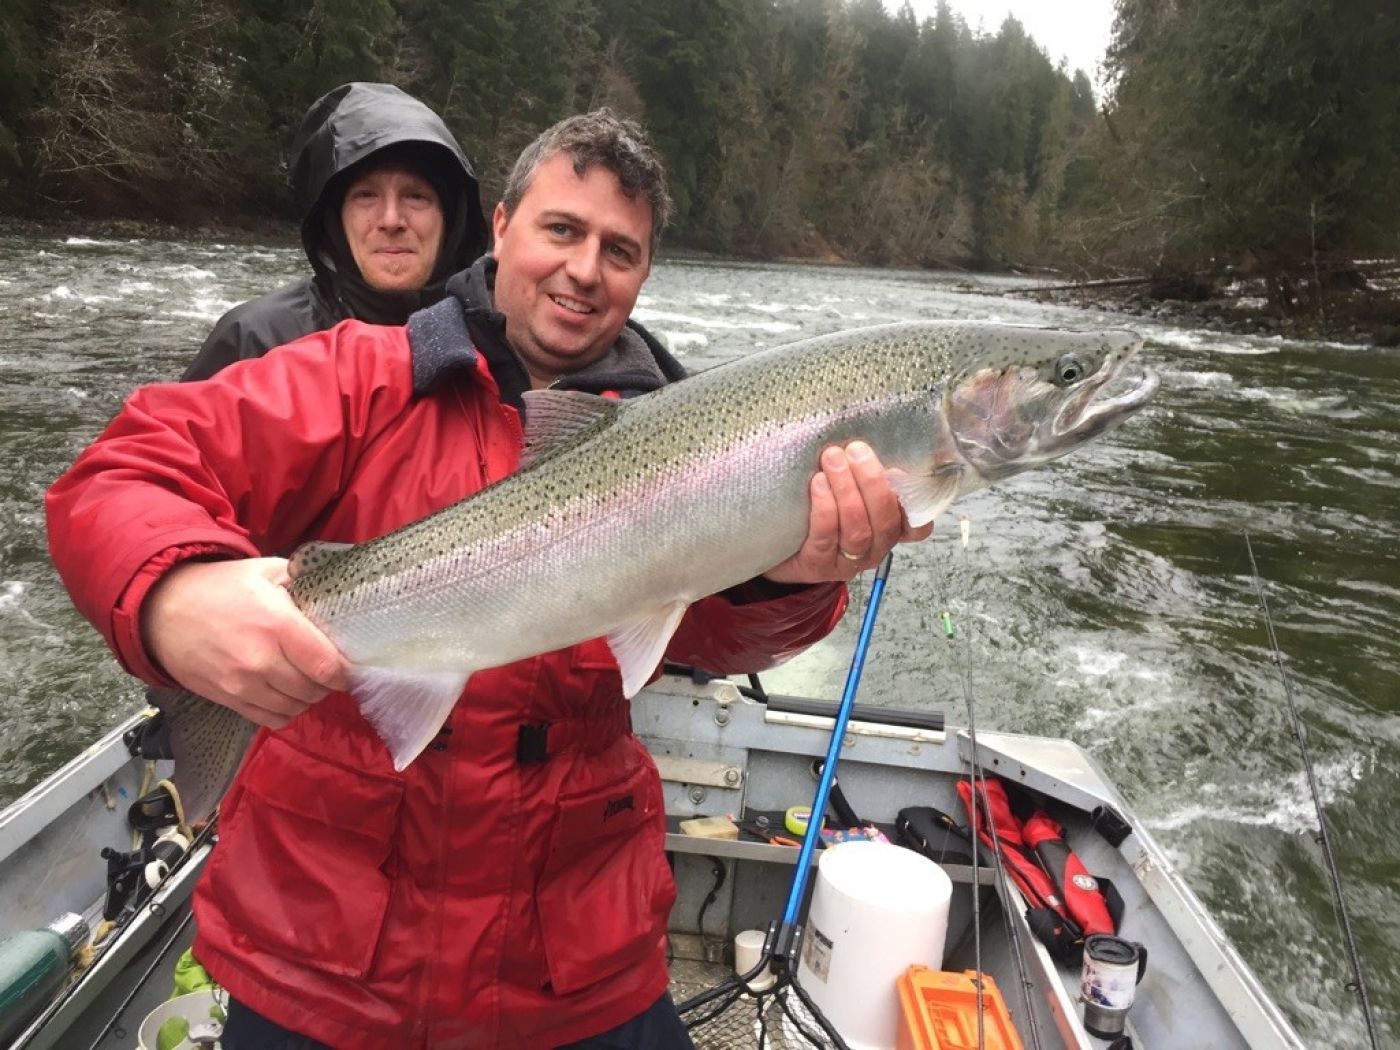 Vancouver Saltwater Fishing Report: January 15, 2016 - Vancouver